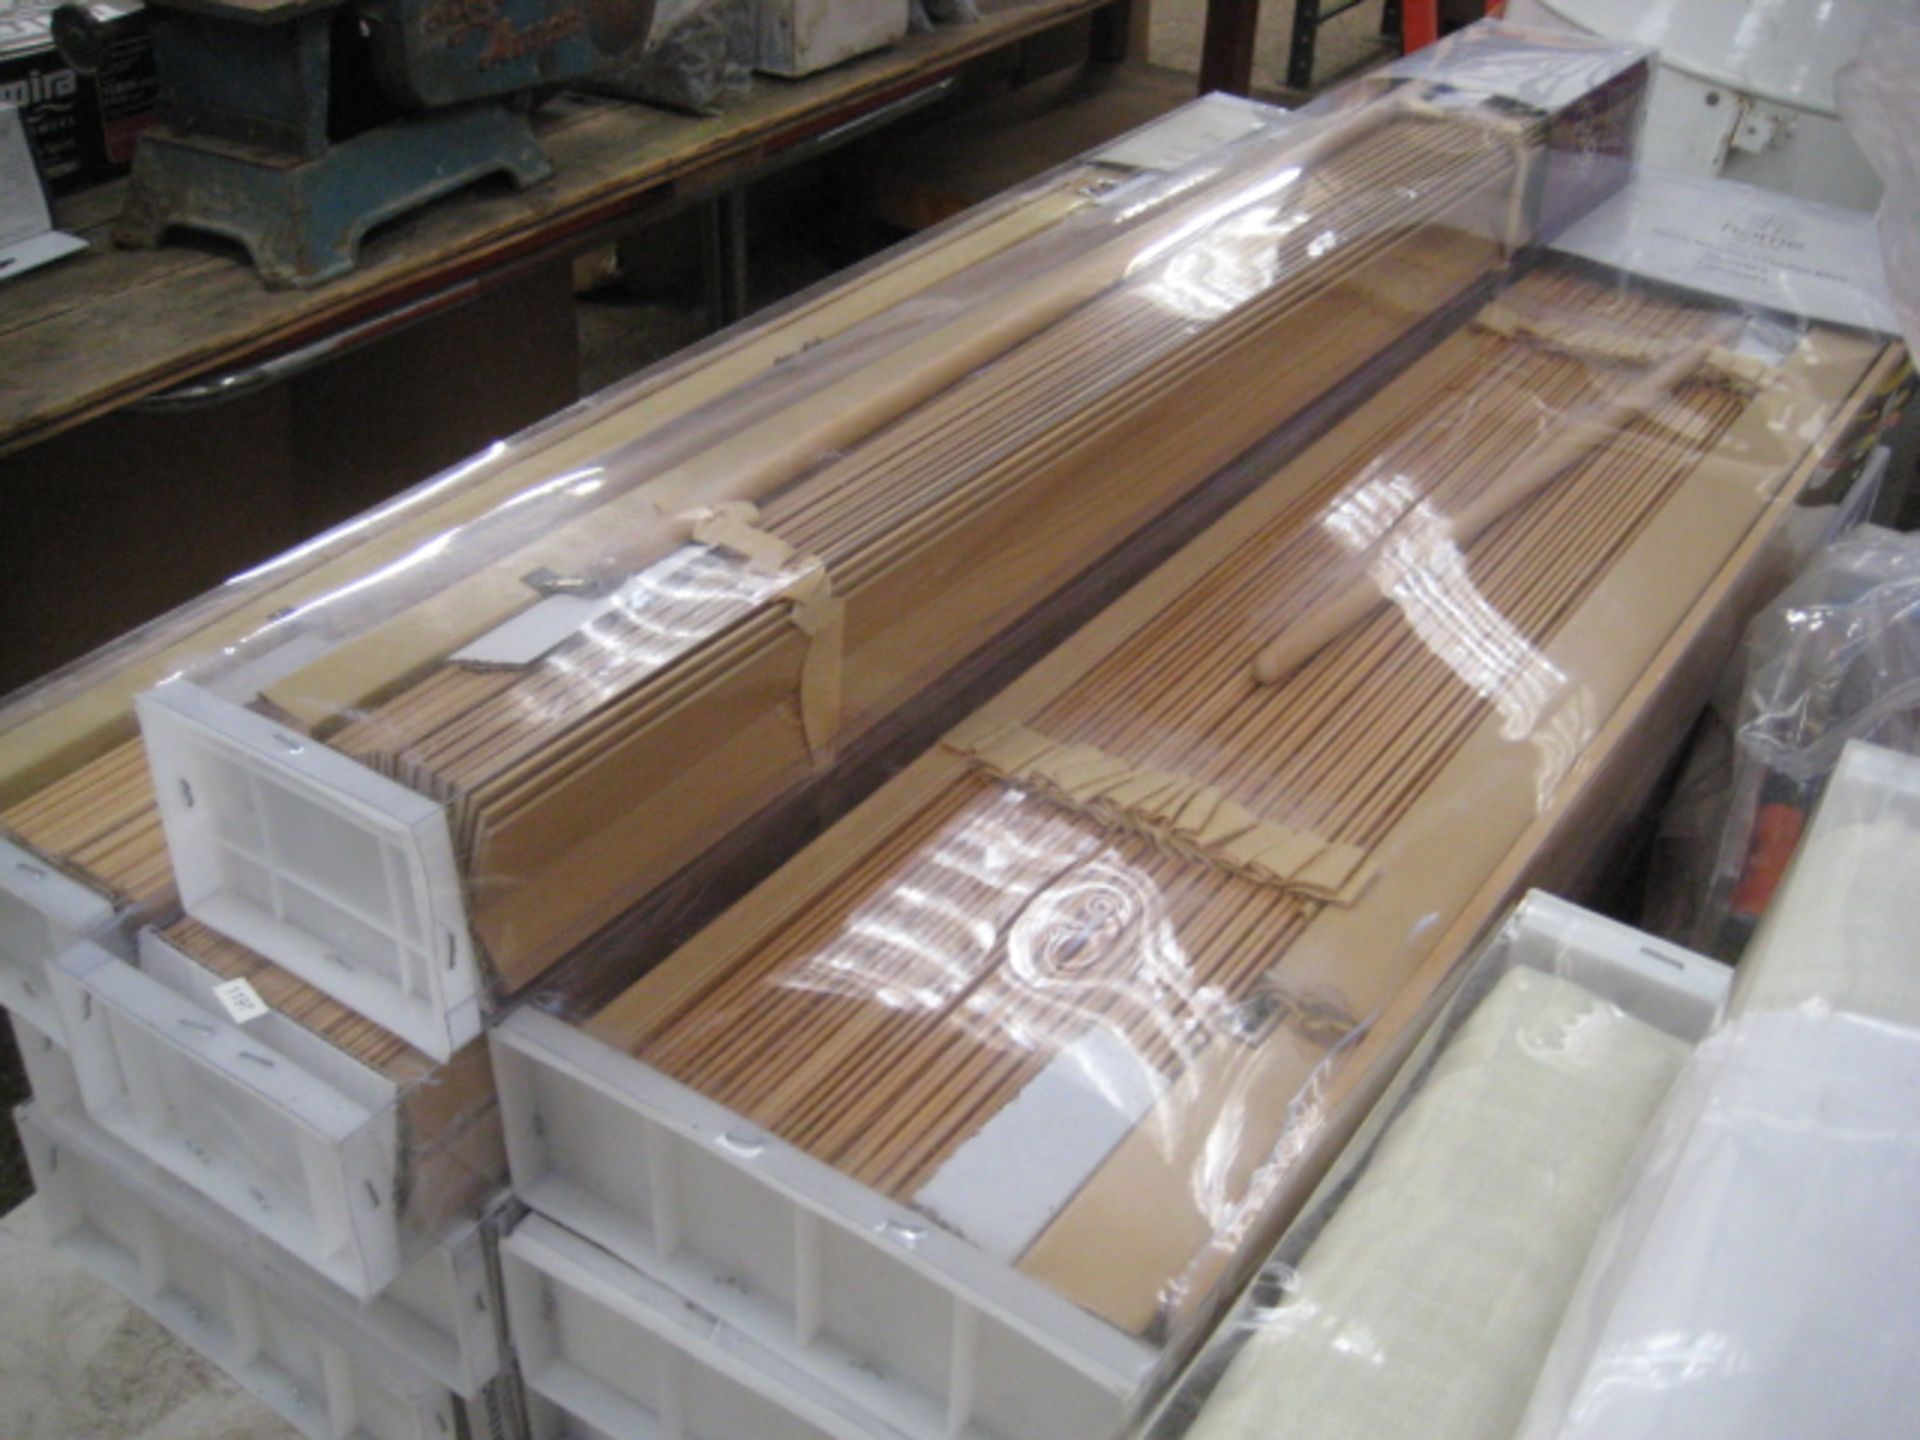 8 various packs of Venetian style blinds incl. 90x152cm and 90x160cm